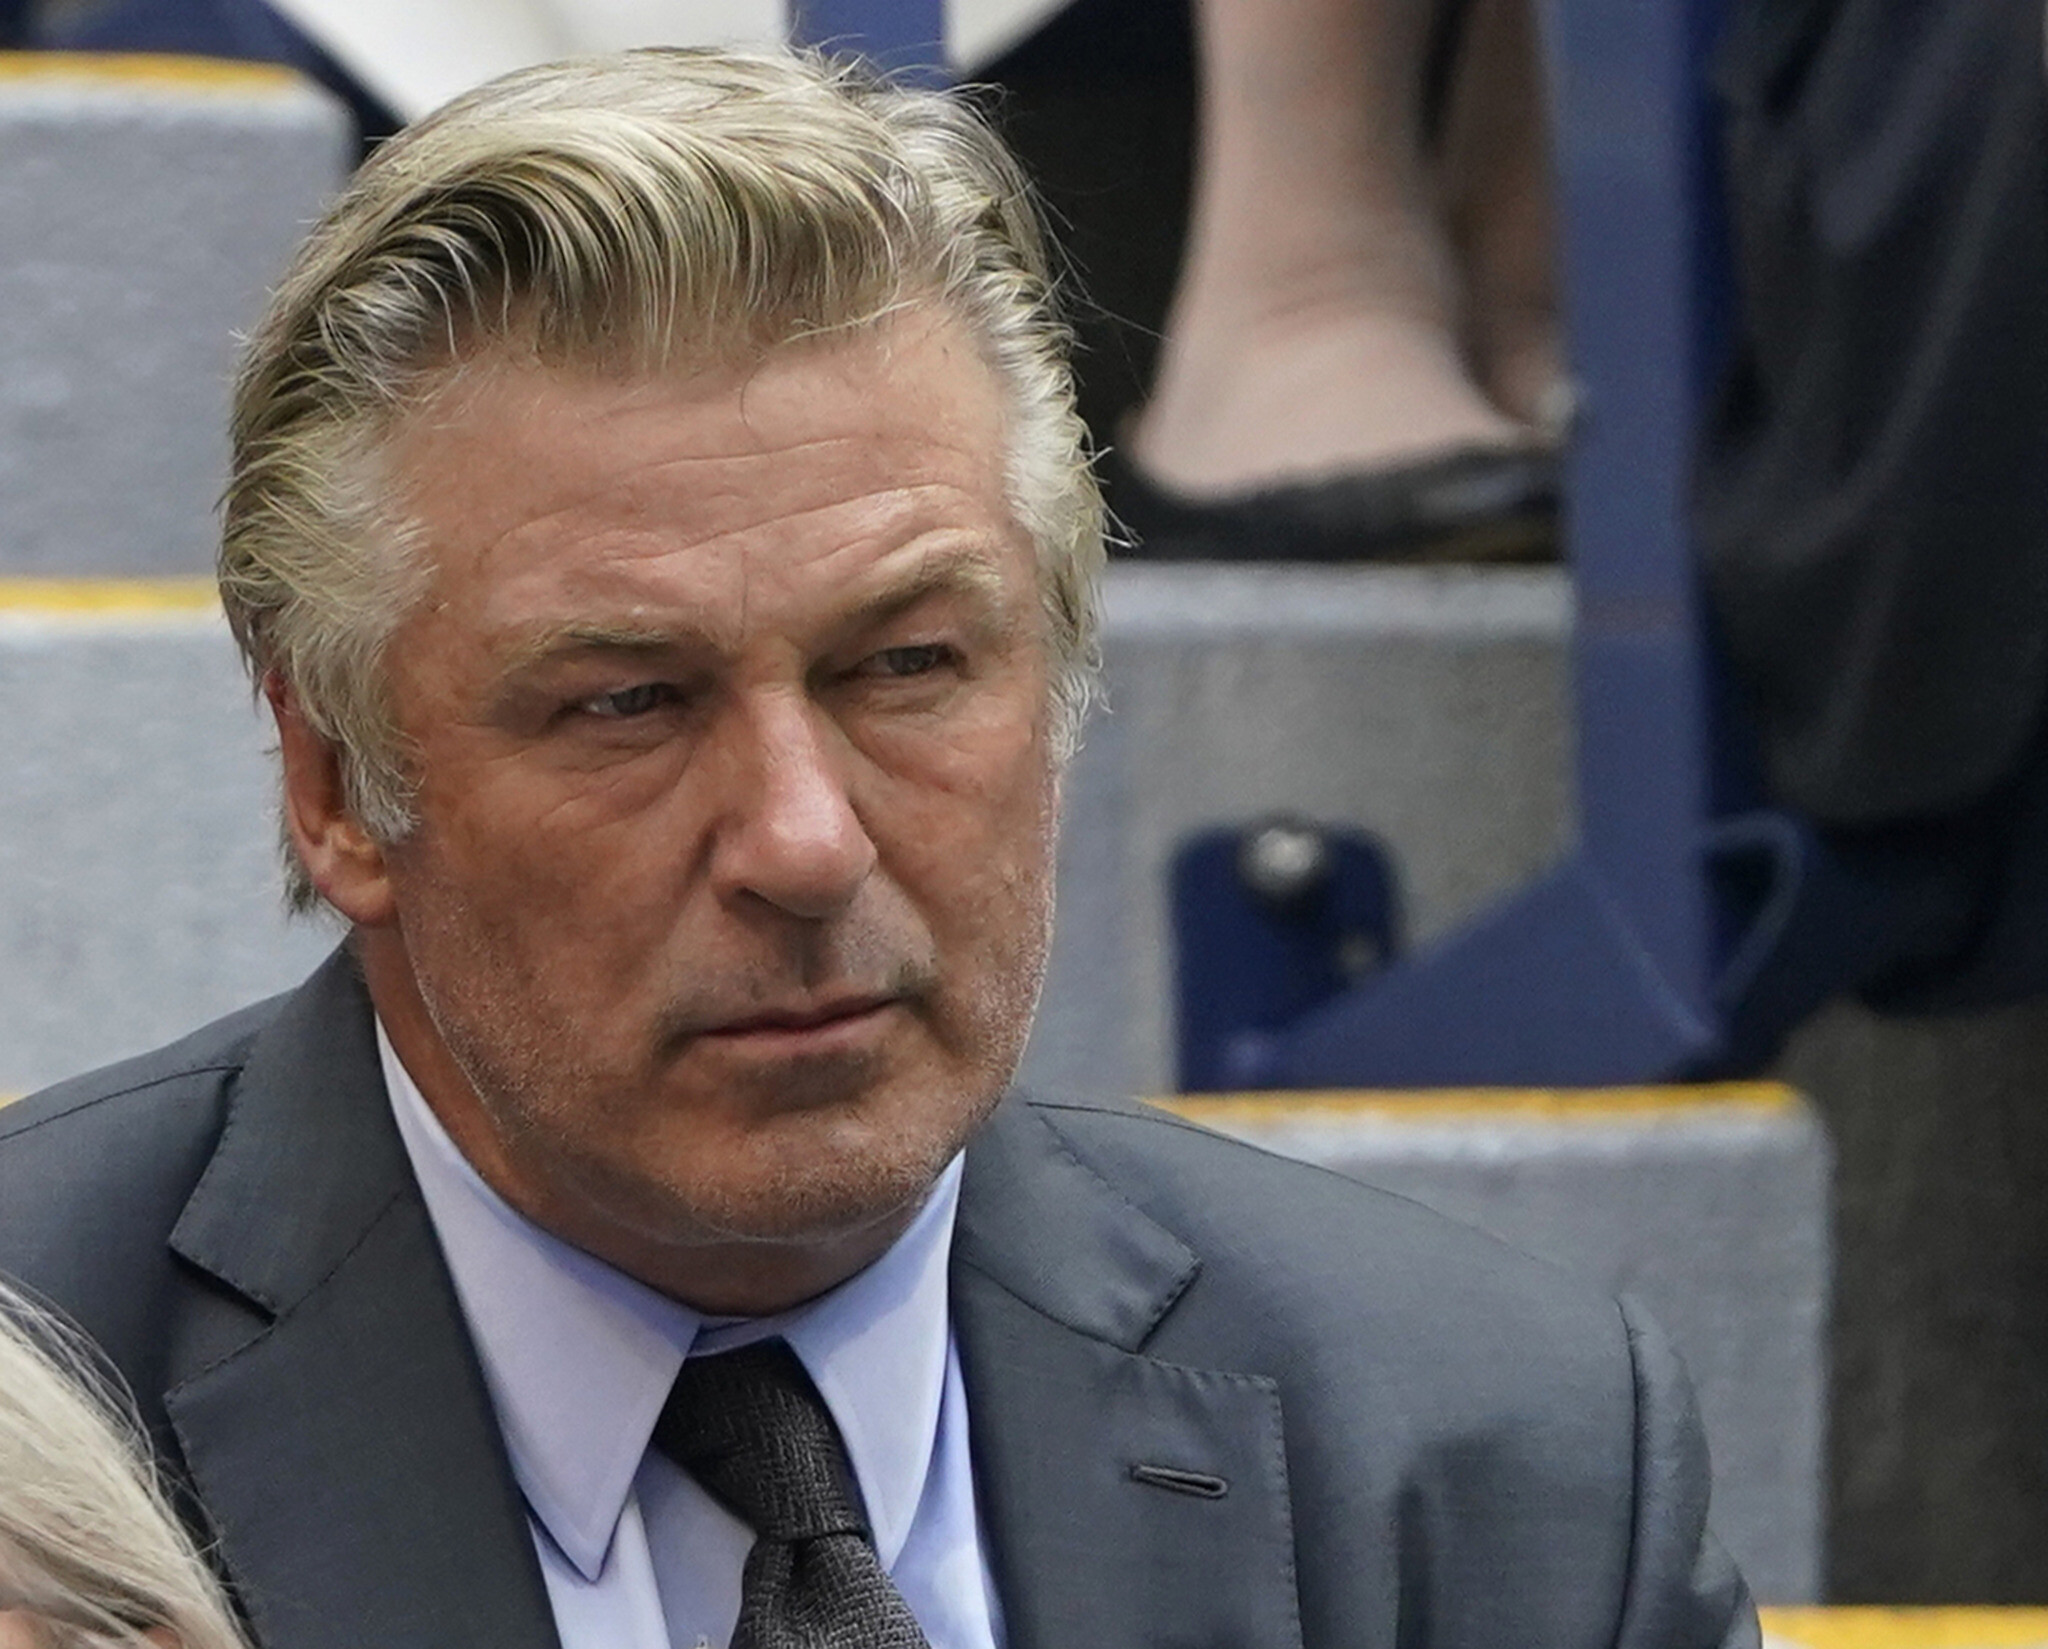 Alec Baldwin fires prop gun on movie set, killing director of photography |  The Times of Israel